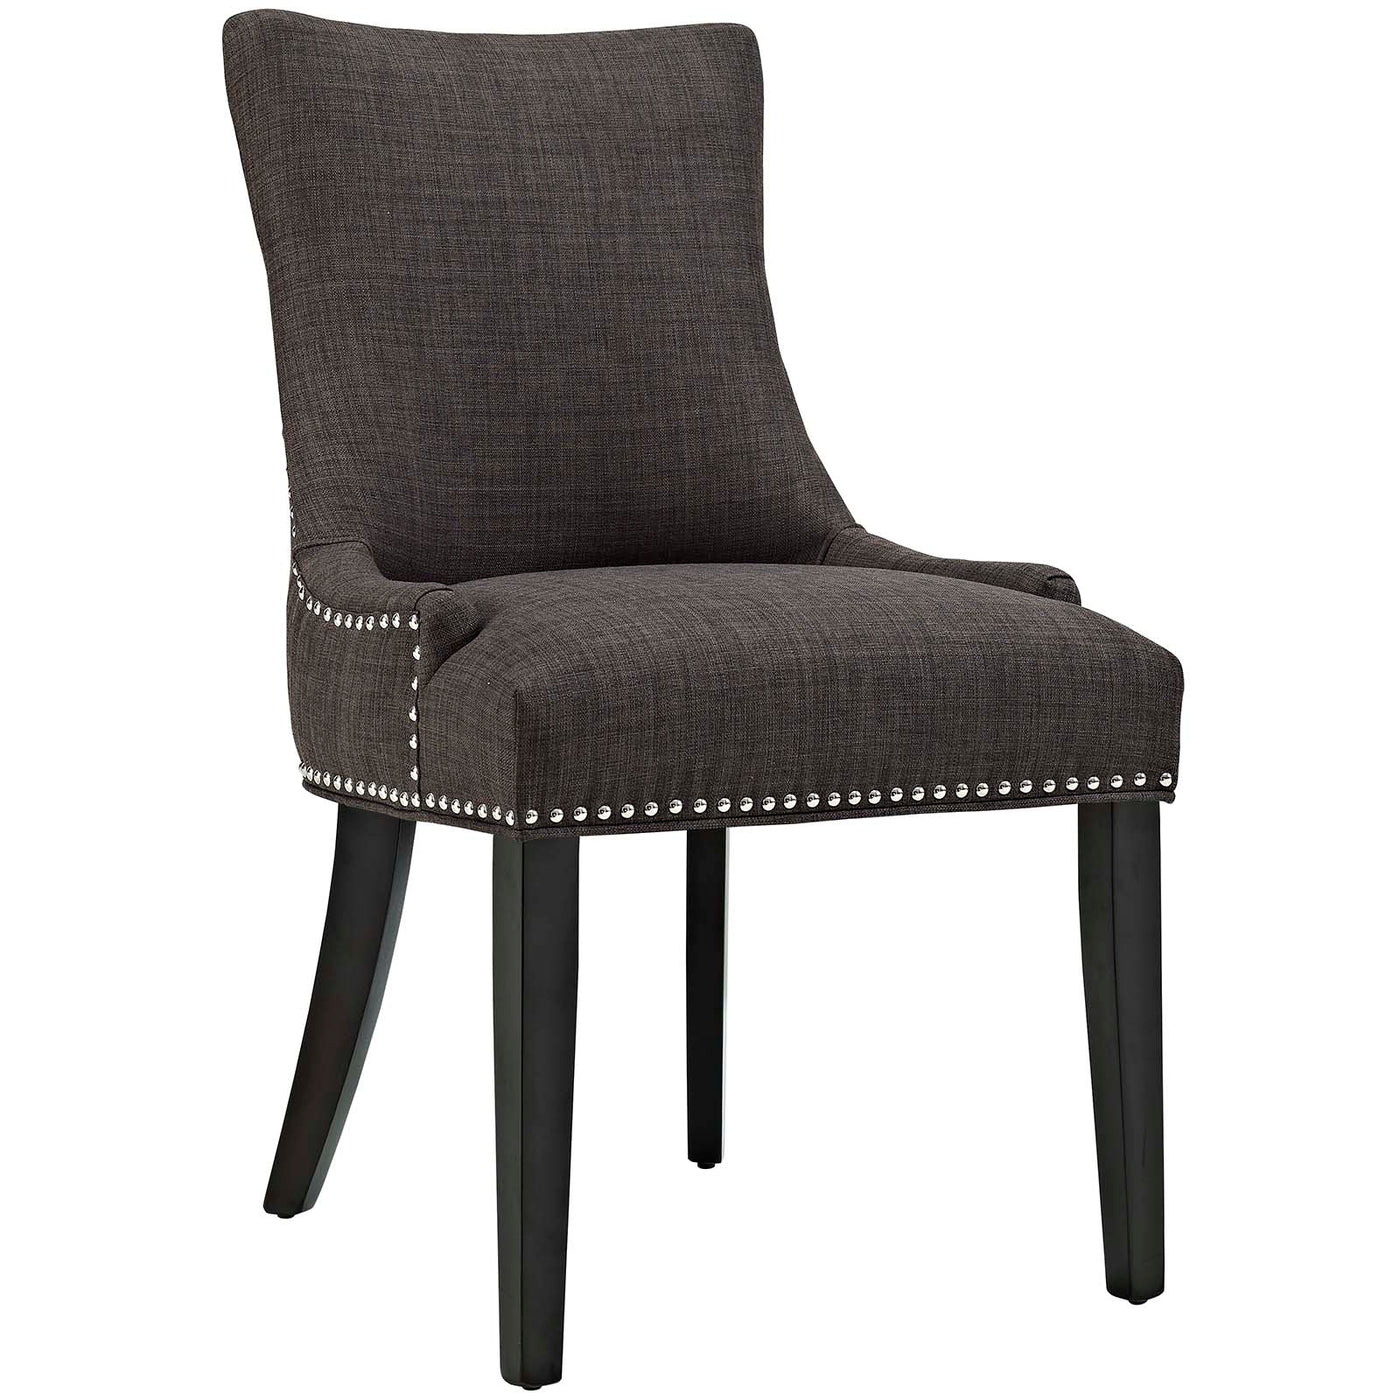 Marquis Dining Chair Fabric Set of 4